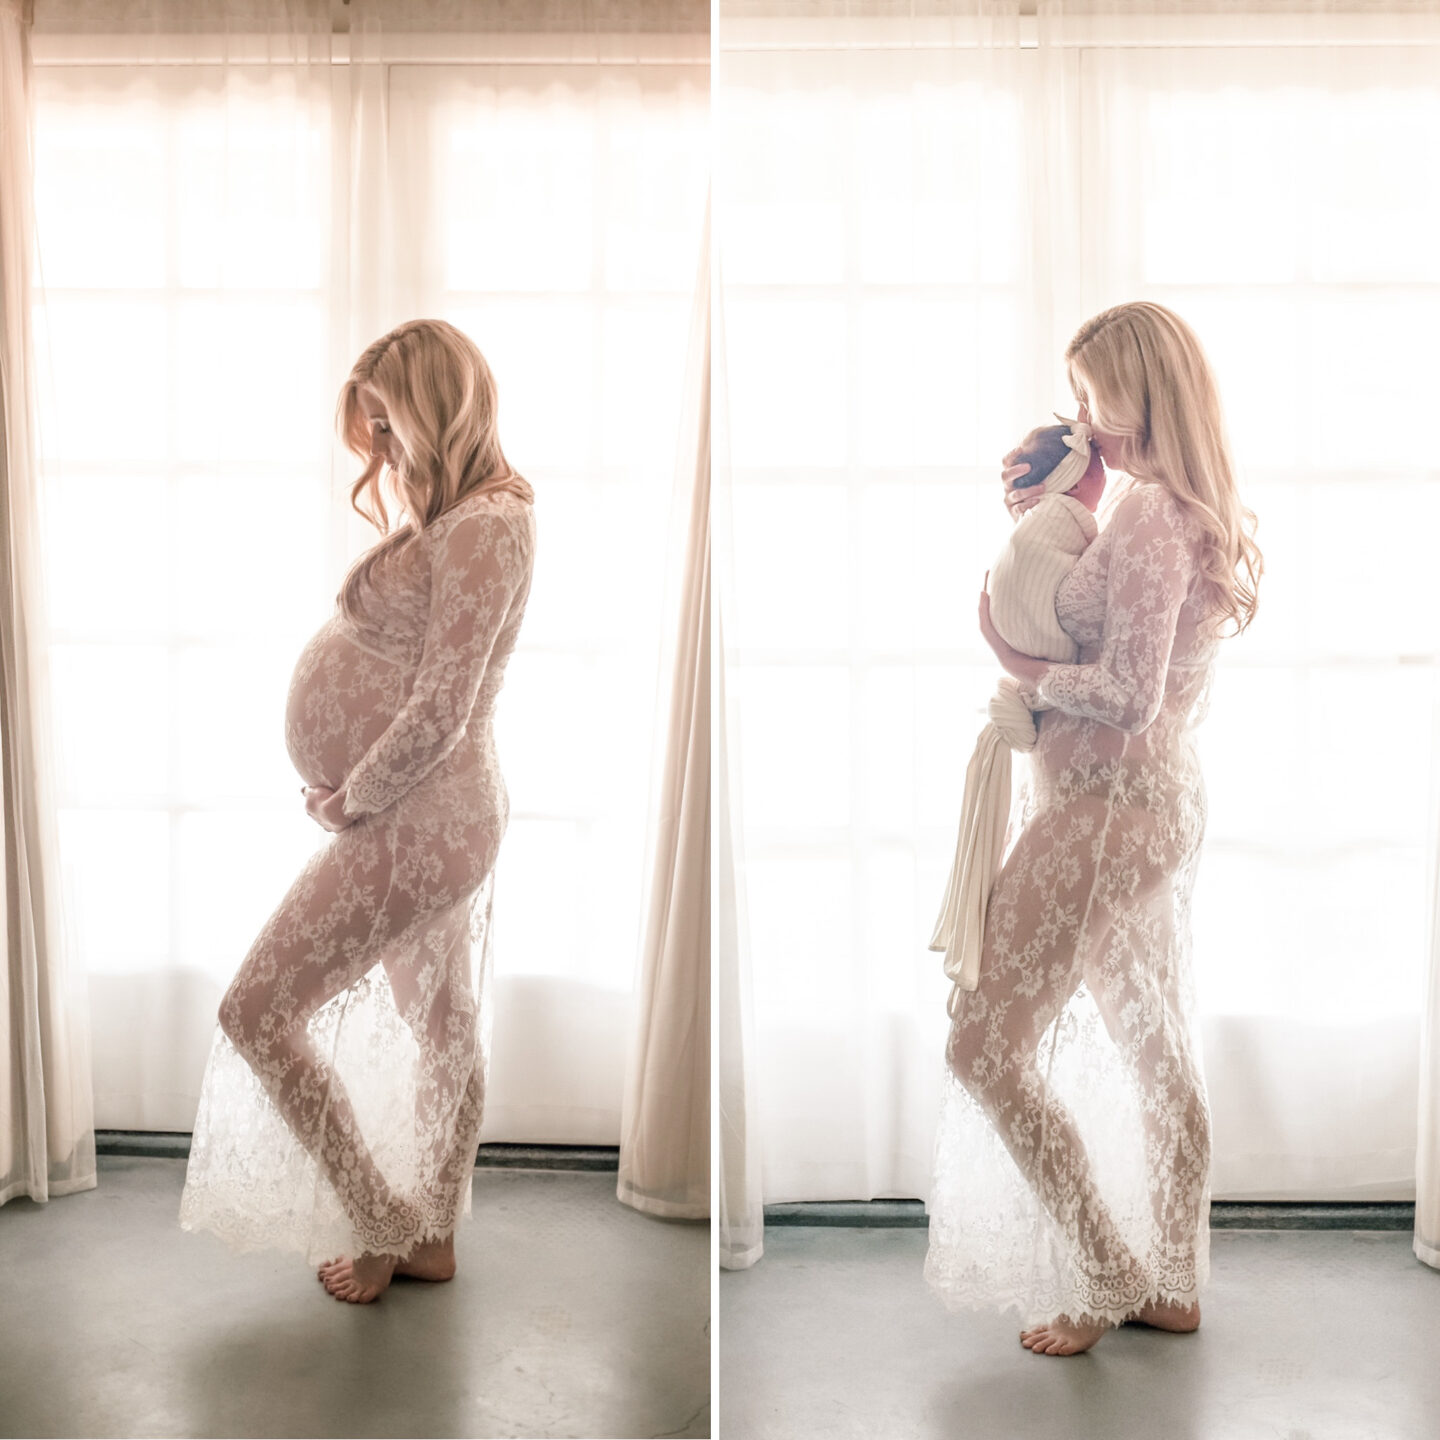 Belevation's maternity brief is a 2013 winner of a Mom Choice